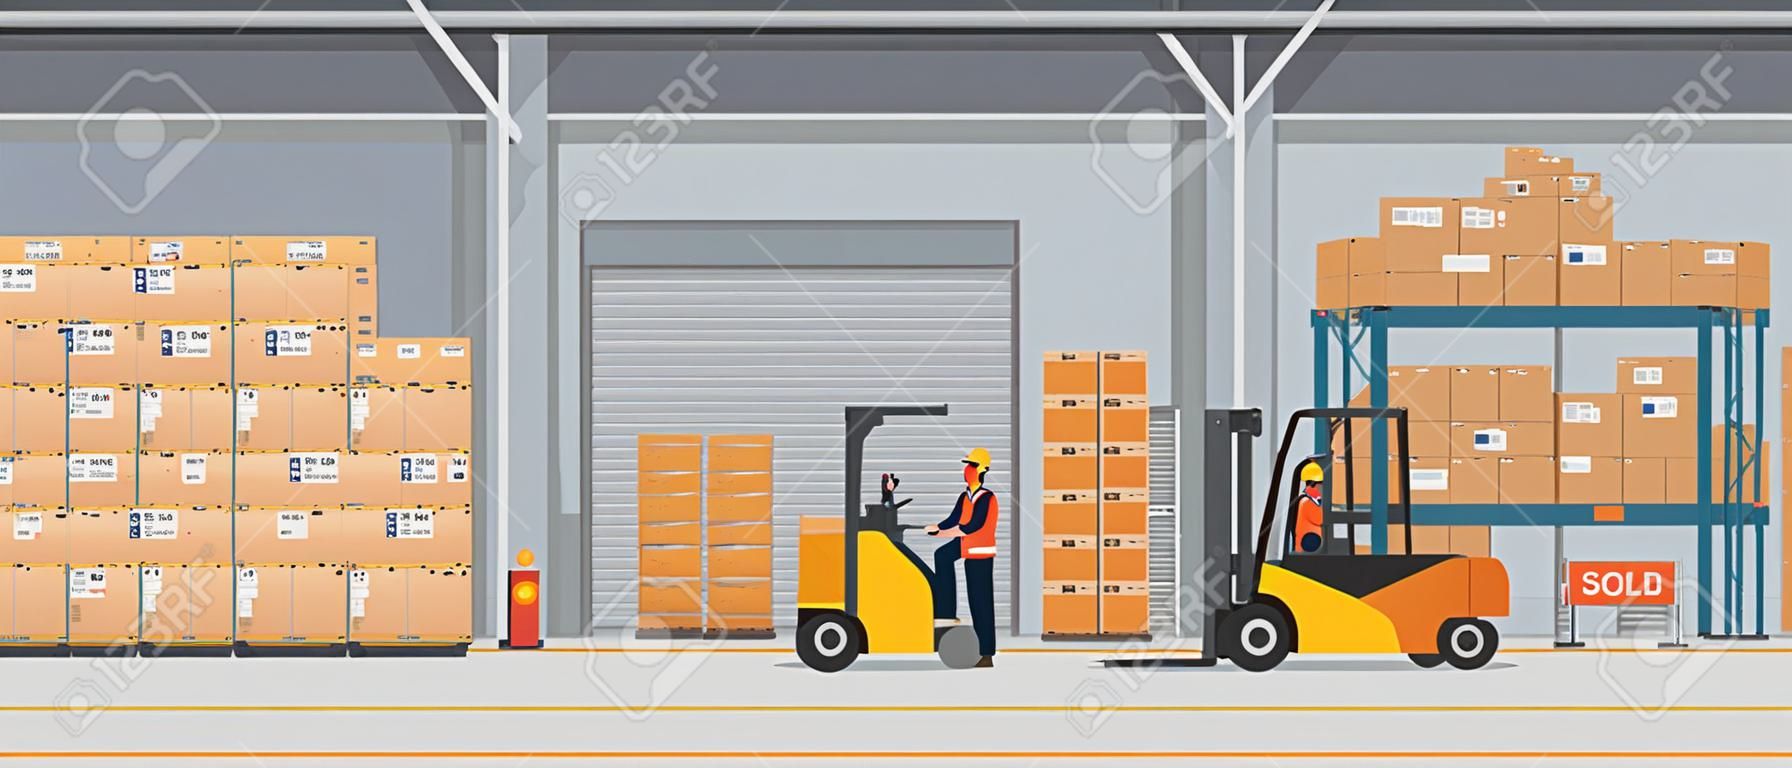 Warehouse Interior with Boxes On Rack And People Working. Flat and solid color style Logistic Delivery Service Concept. Vector Illustration.